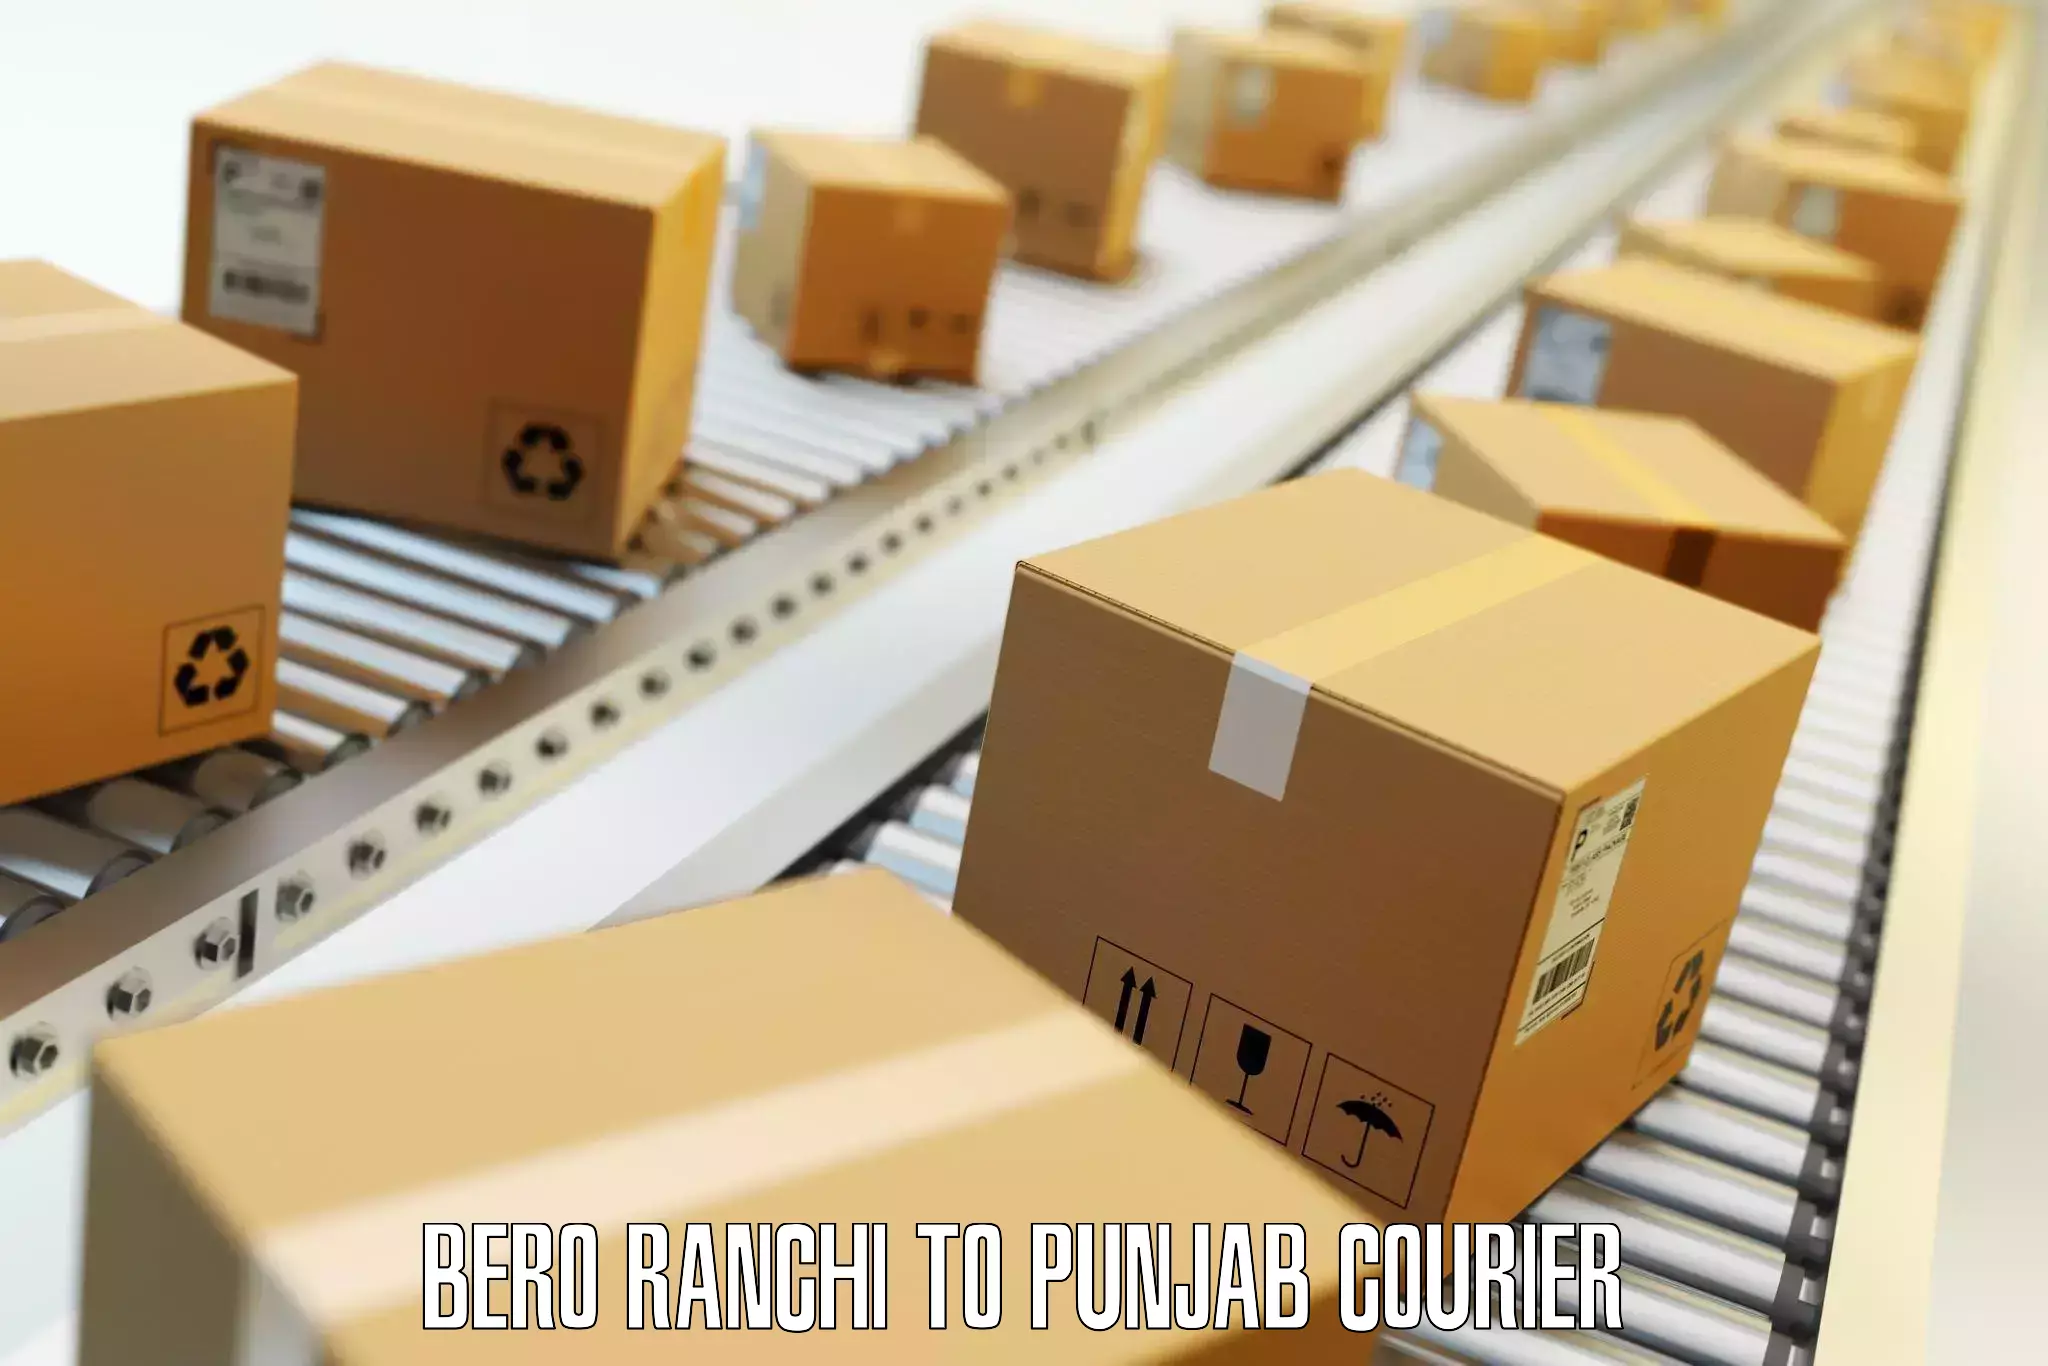 Luggage delivery providers Bero Ranchi to Punjab